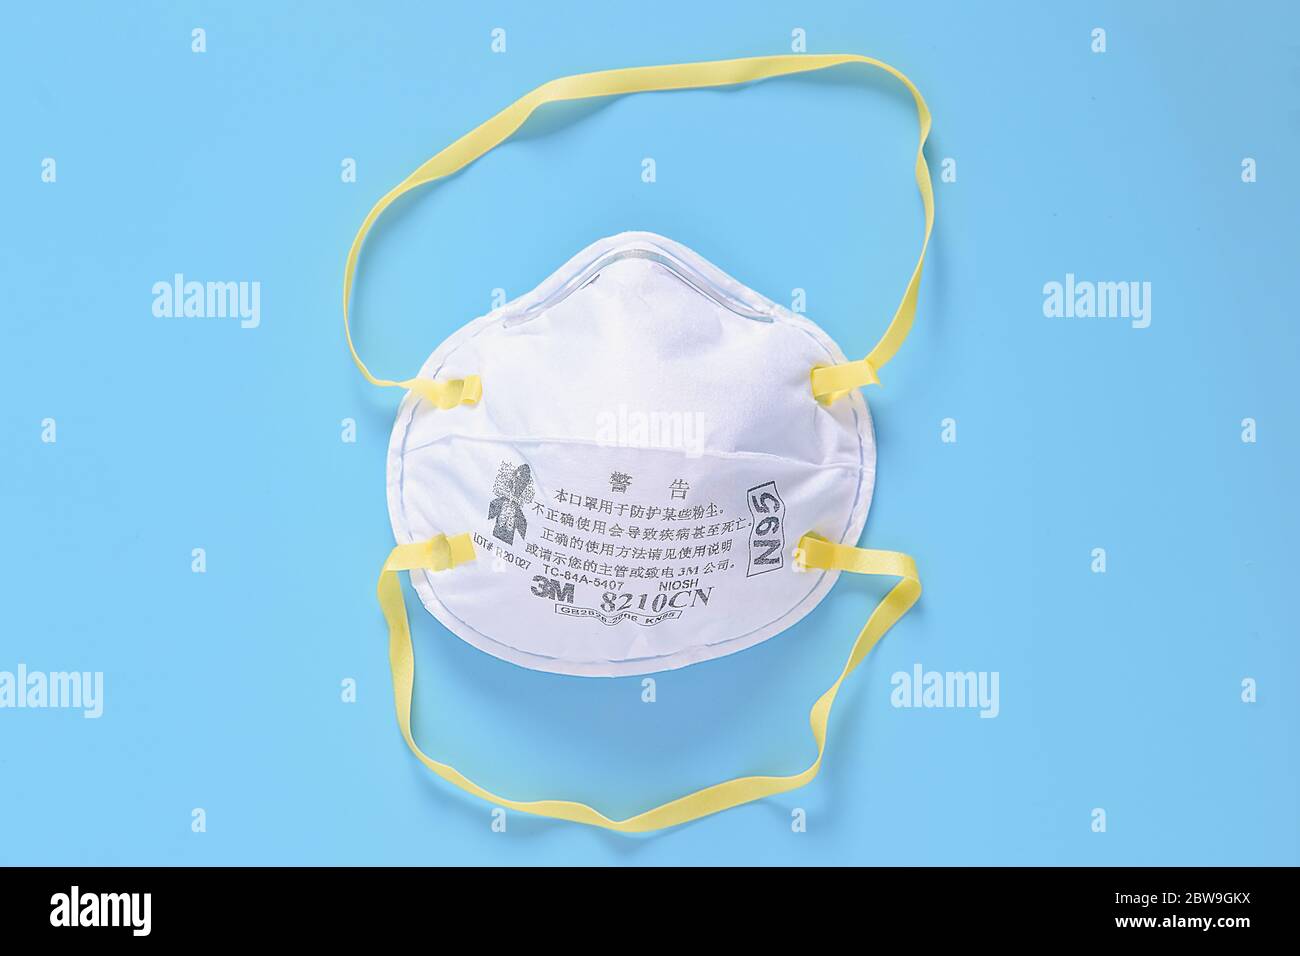 KHON KAEN ,THAILAND,31 MAY 2020 : 3M N95 respirator face mask on blue background N95 a heavy duty protective mask designed to filter out 95 percent of Stock Photo